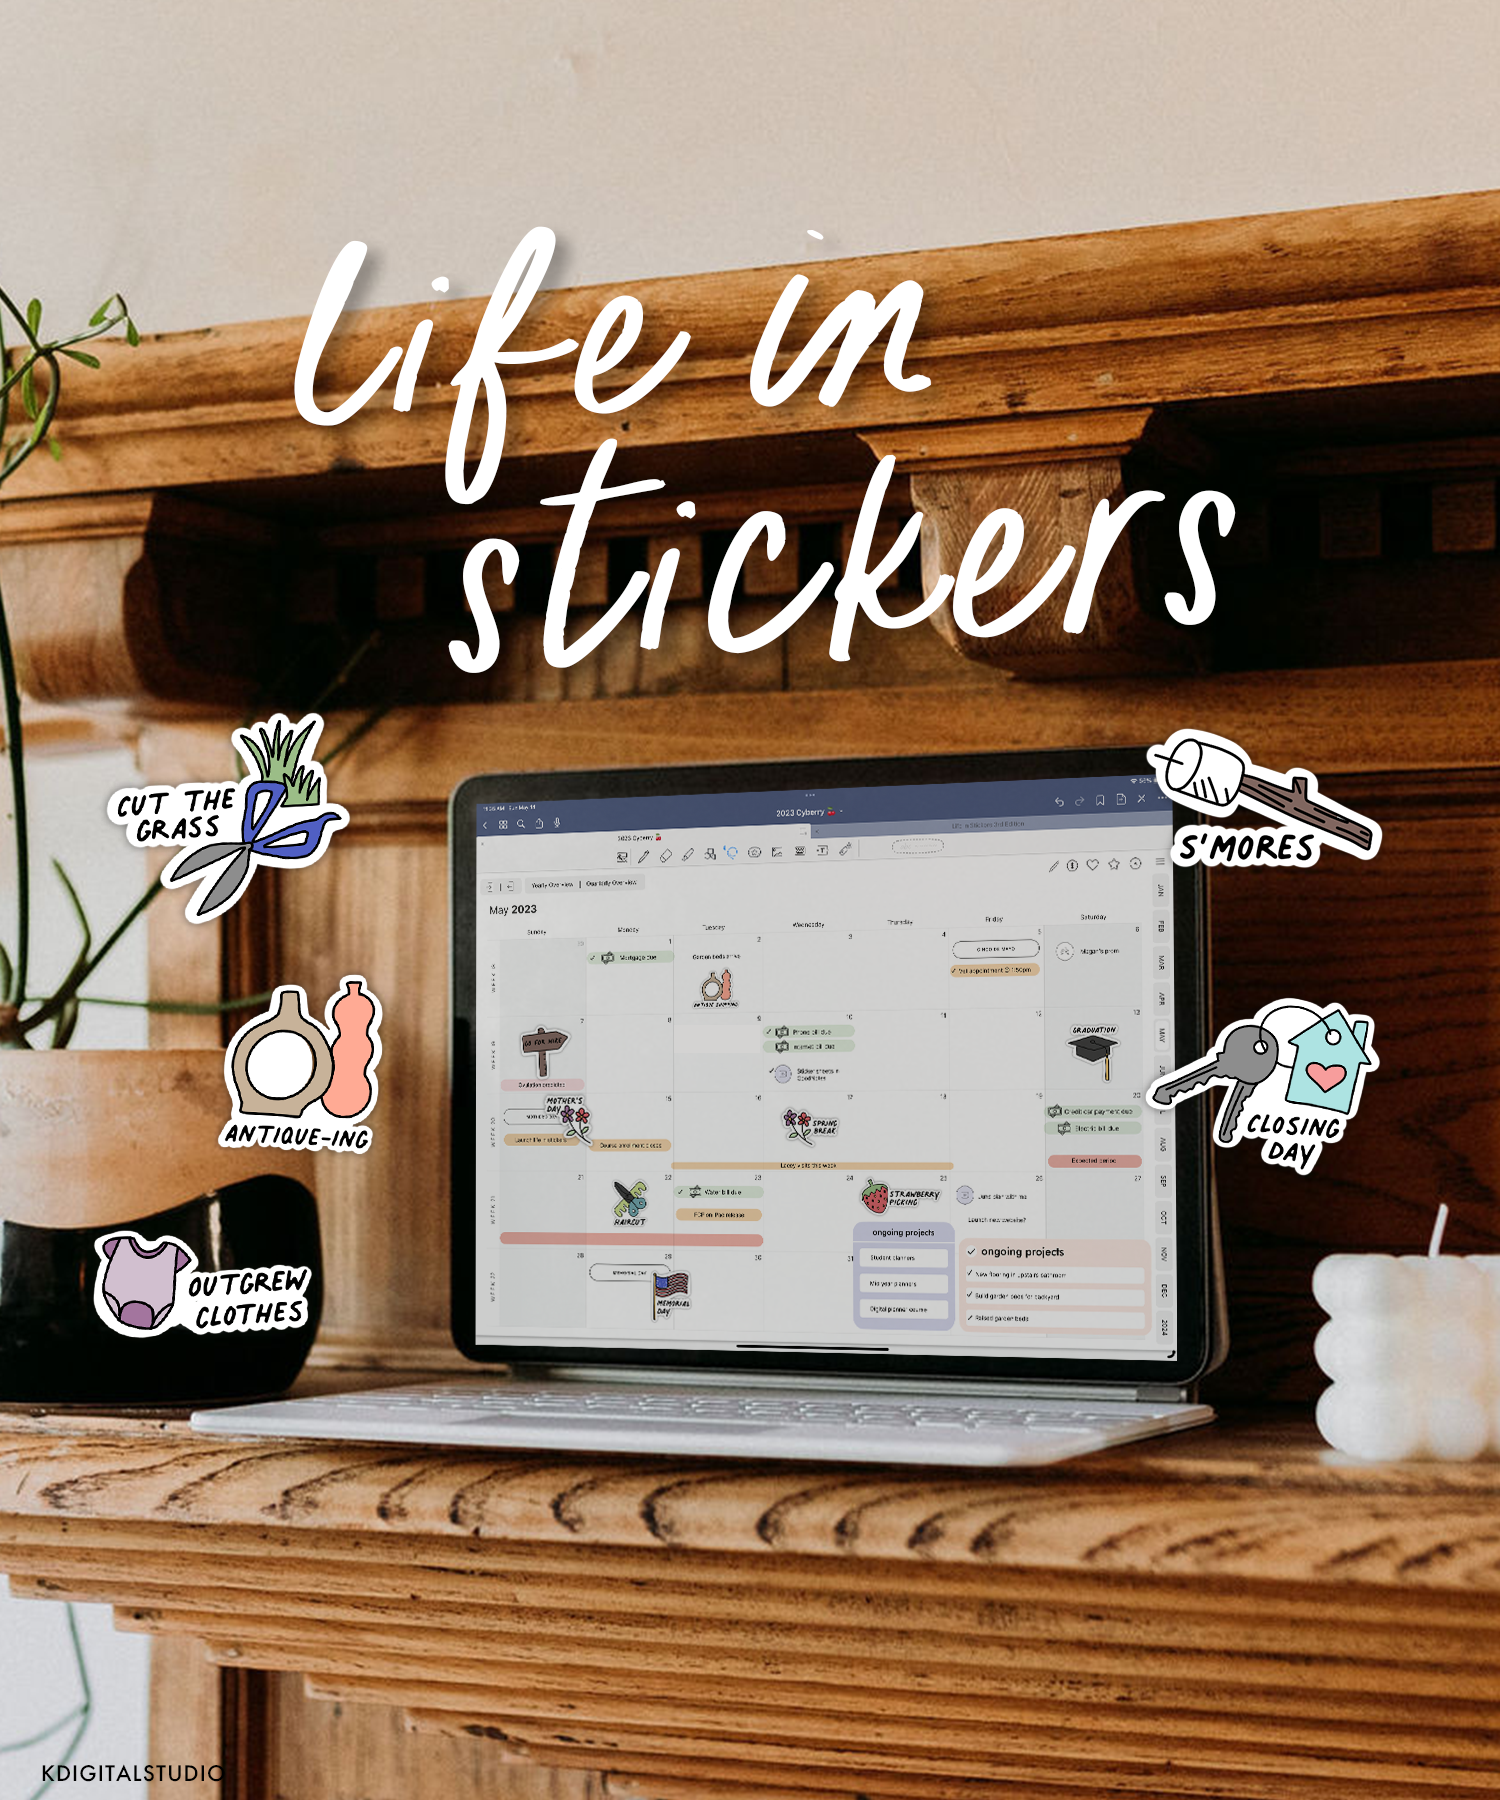 iPad sitting on mantle surrounded by Life in Stickers